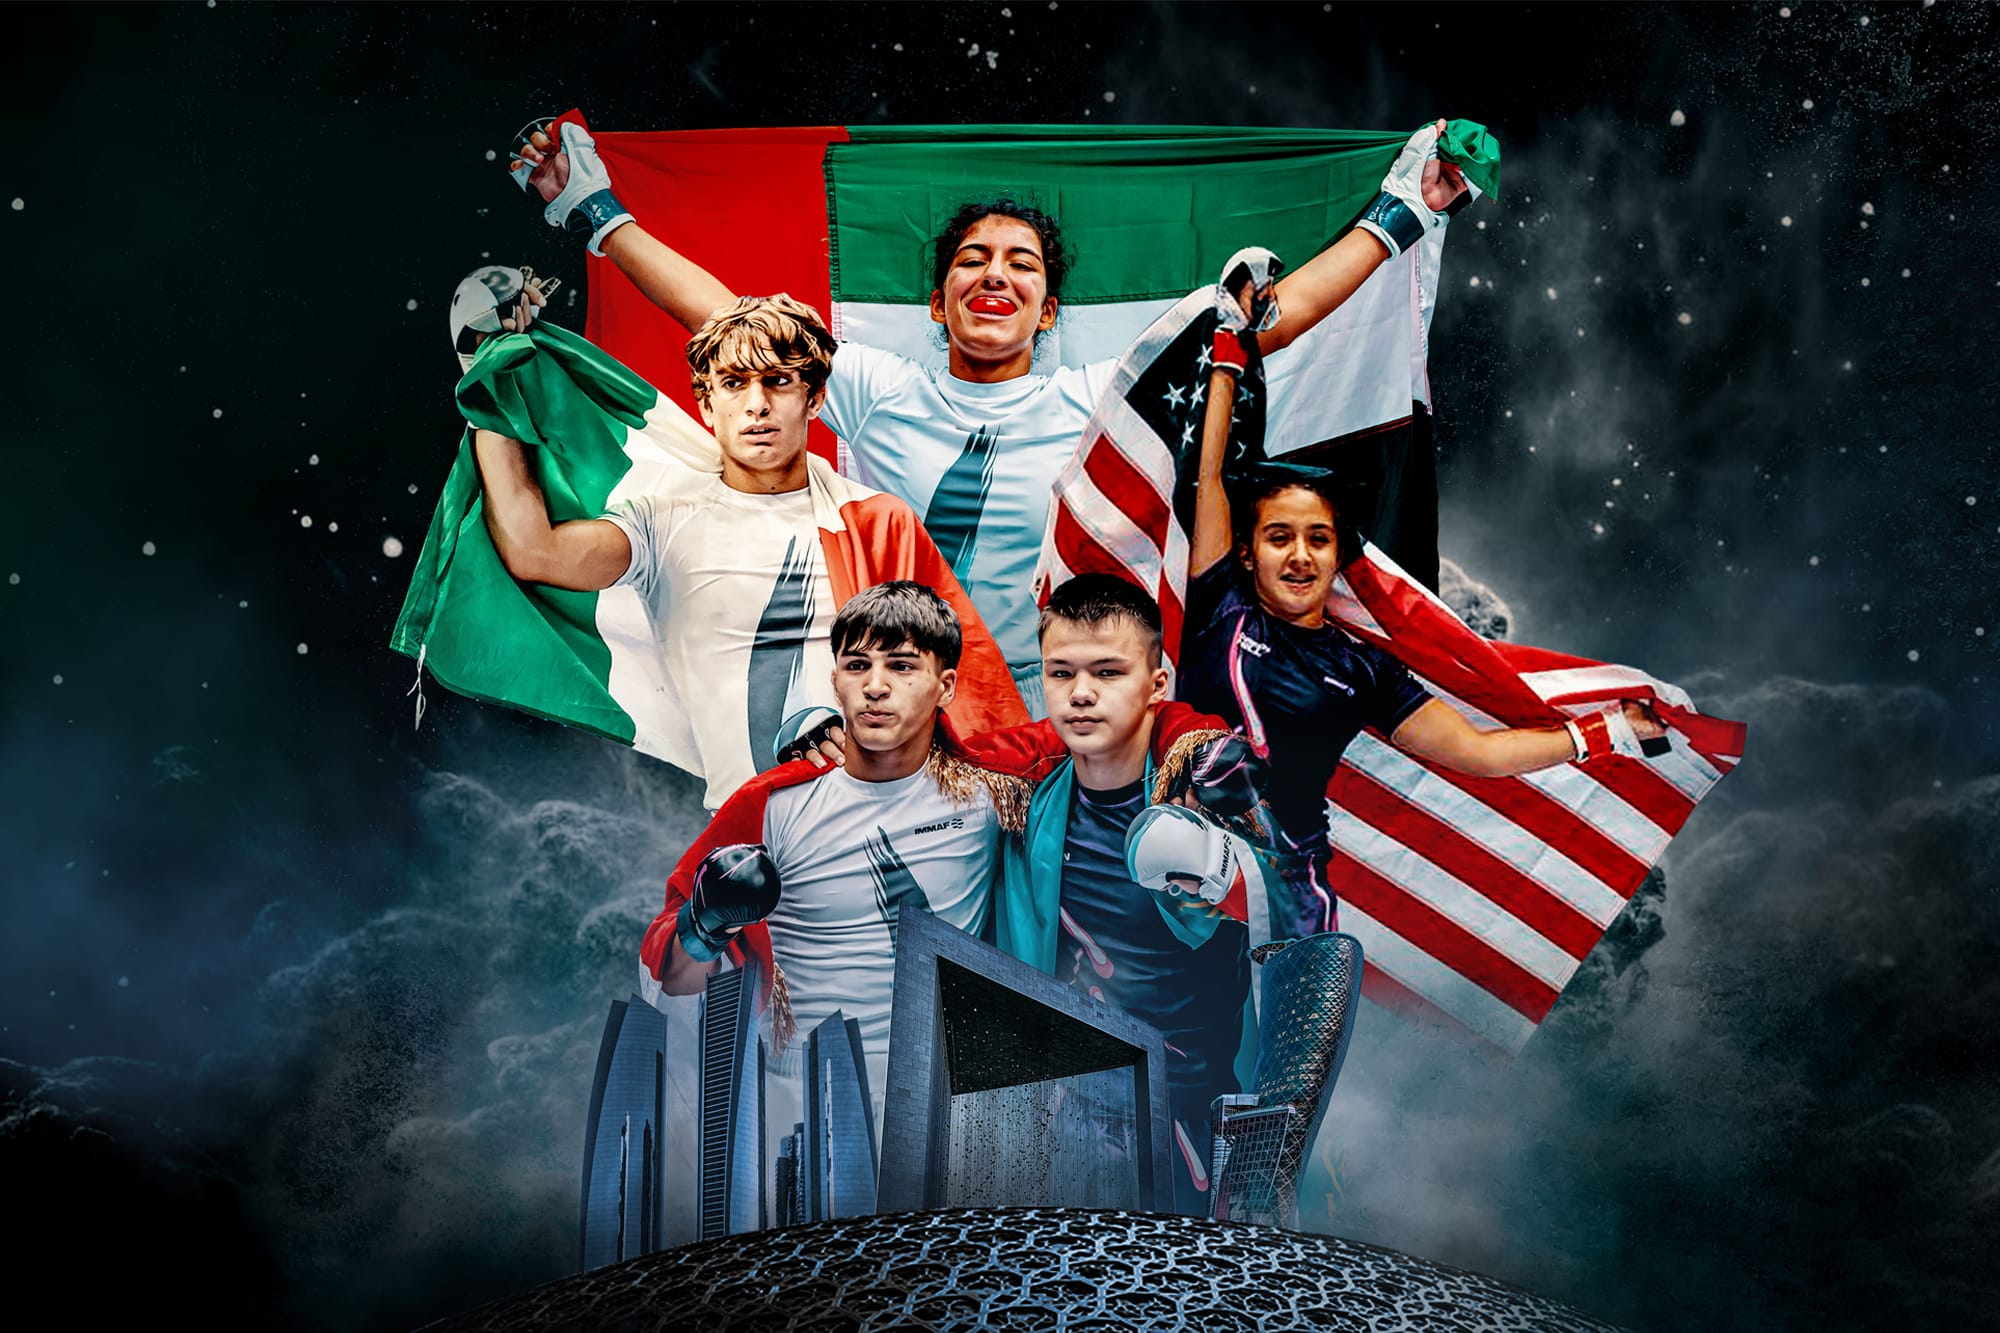 IMMAF Youth World Championships in Abu Dhabi to feature over 800 athletes from 45 countries